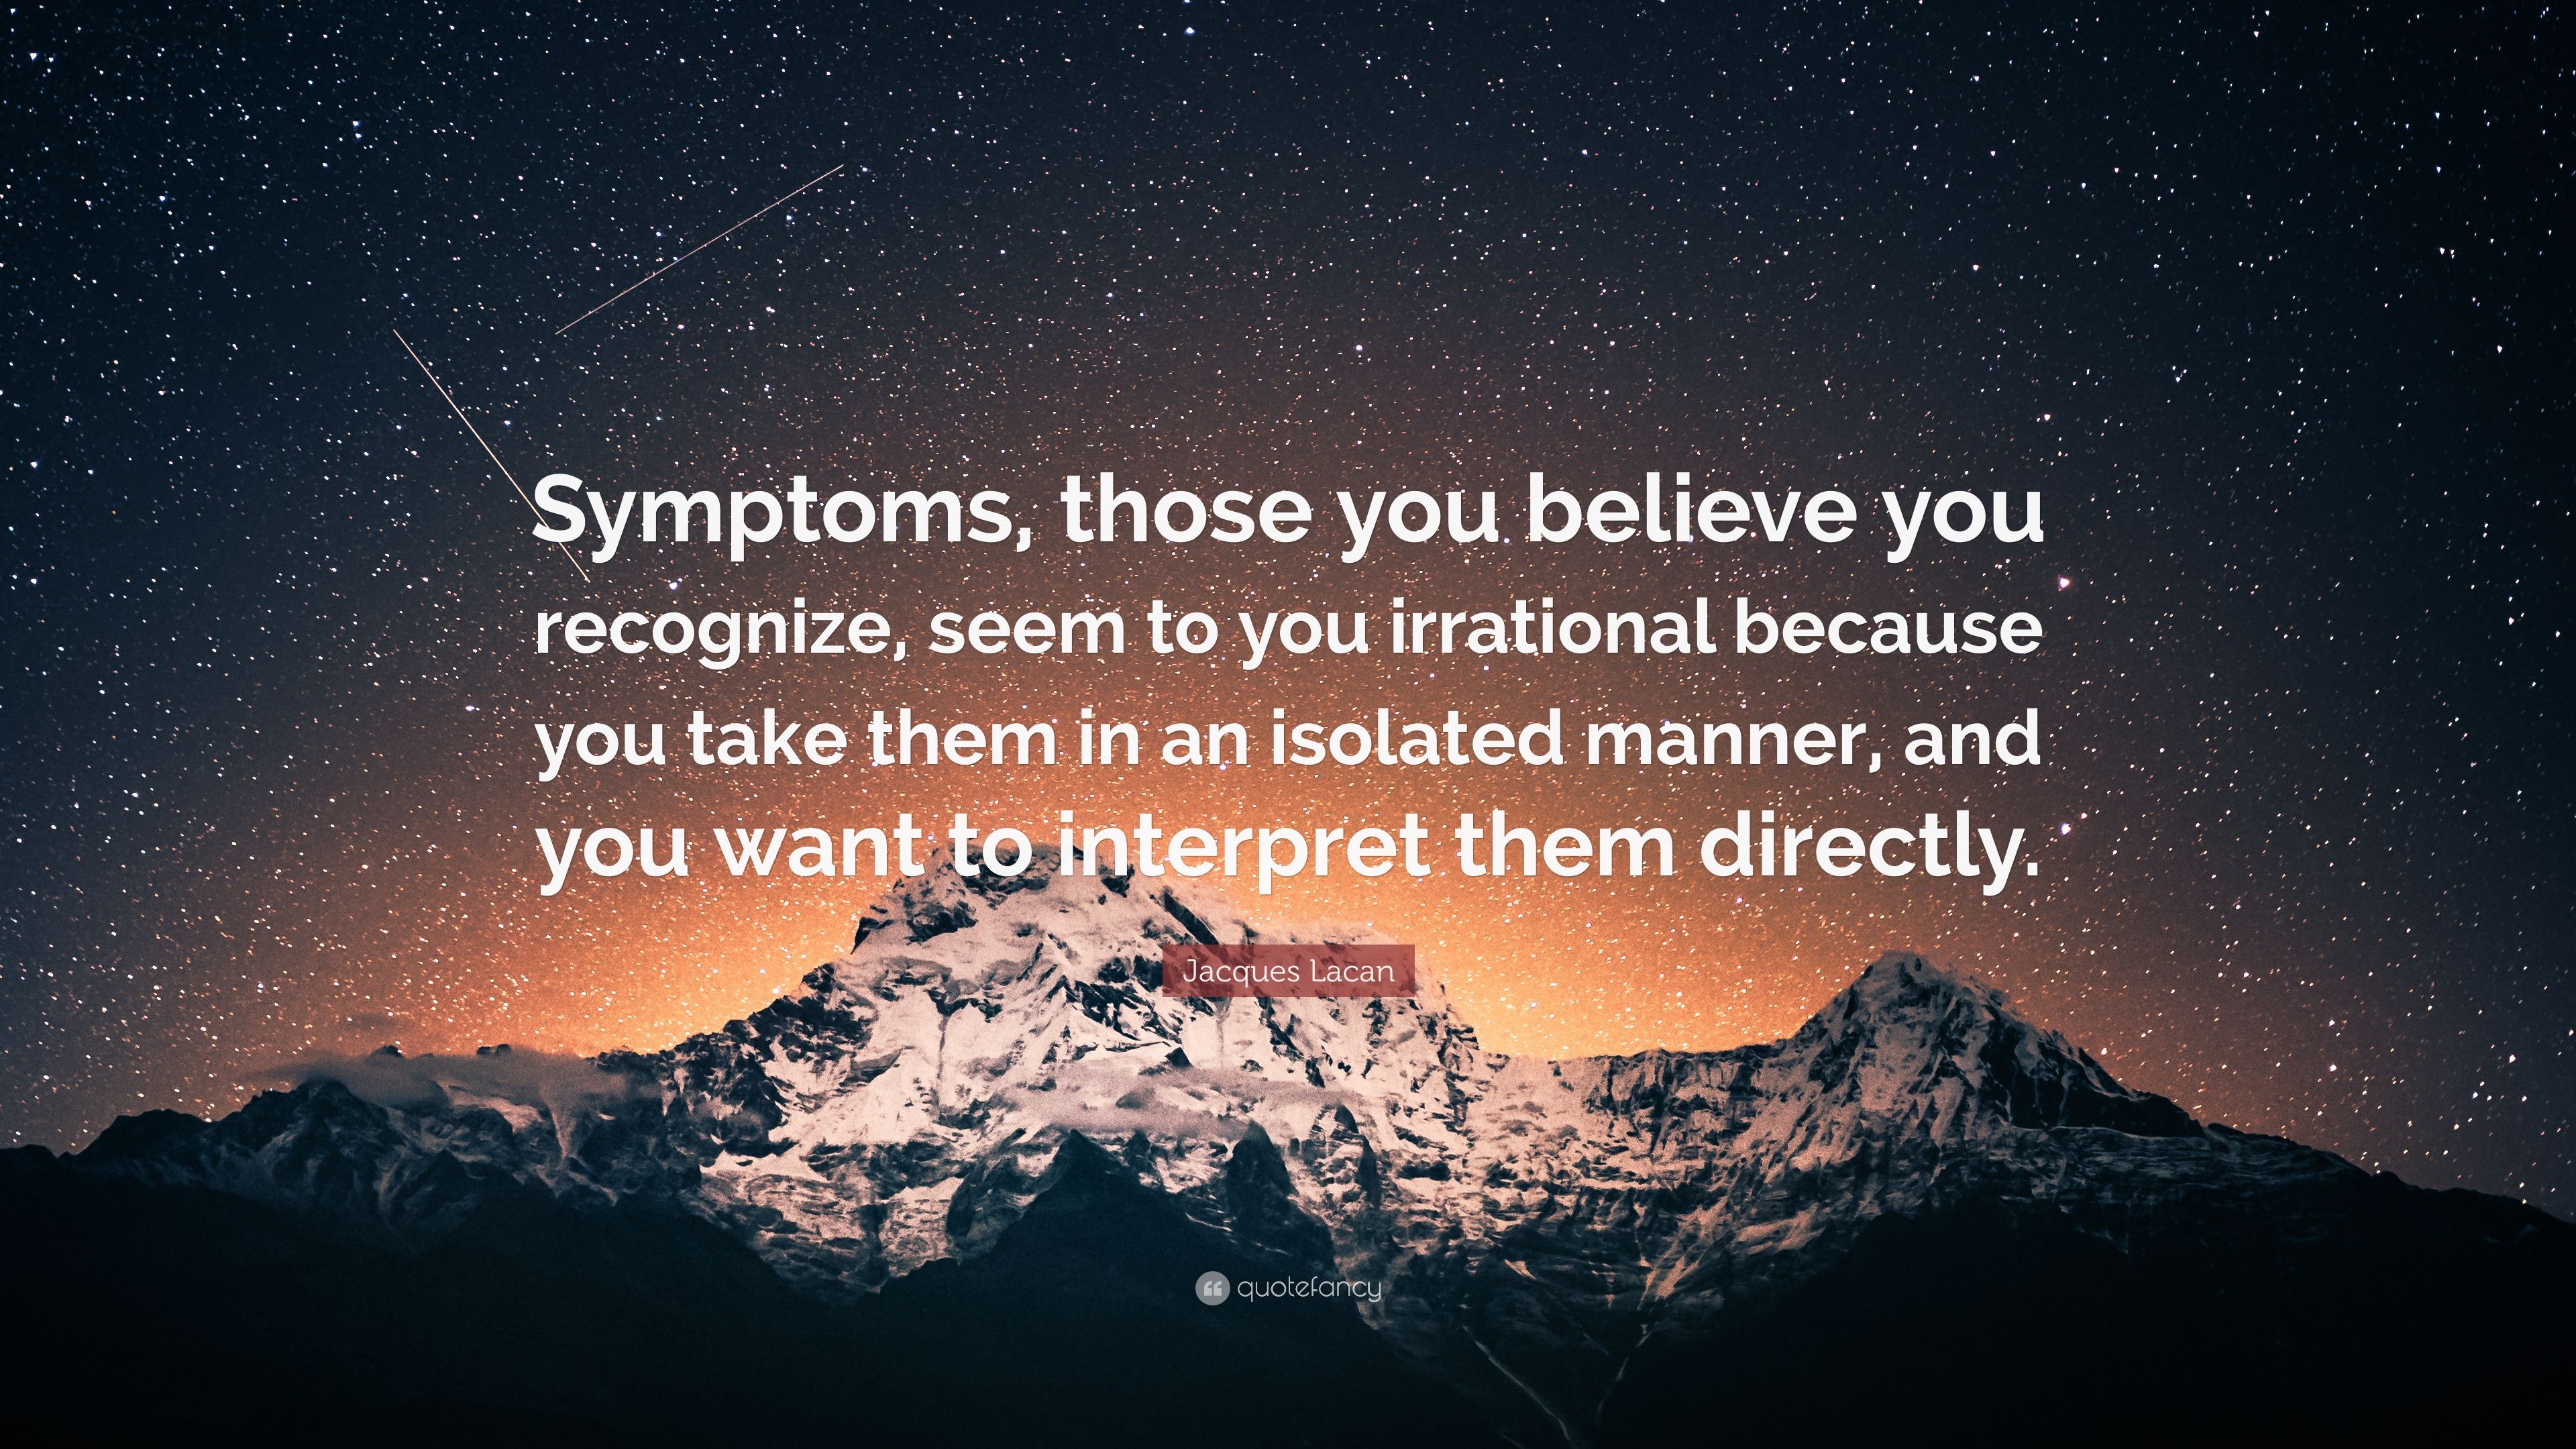 Jacques Lacan Quote: “Symptoms, those you believe you recognize